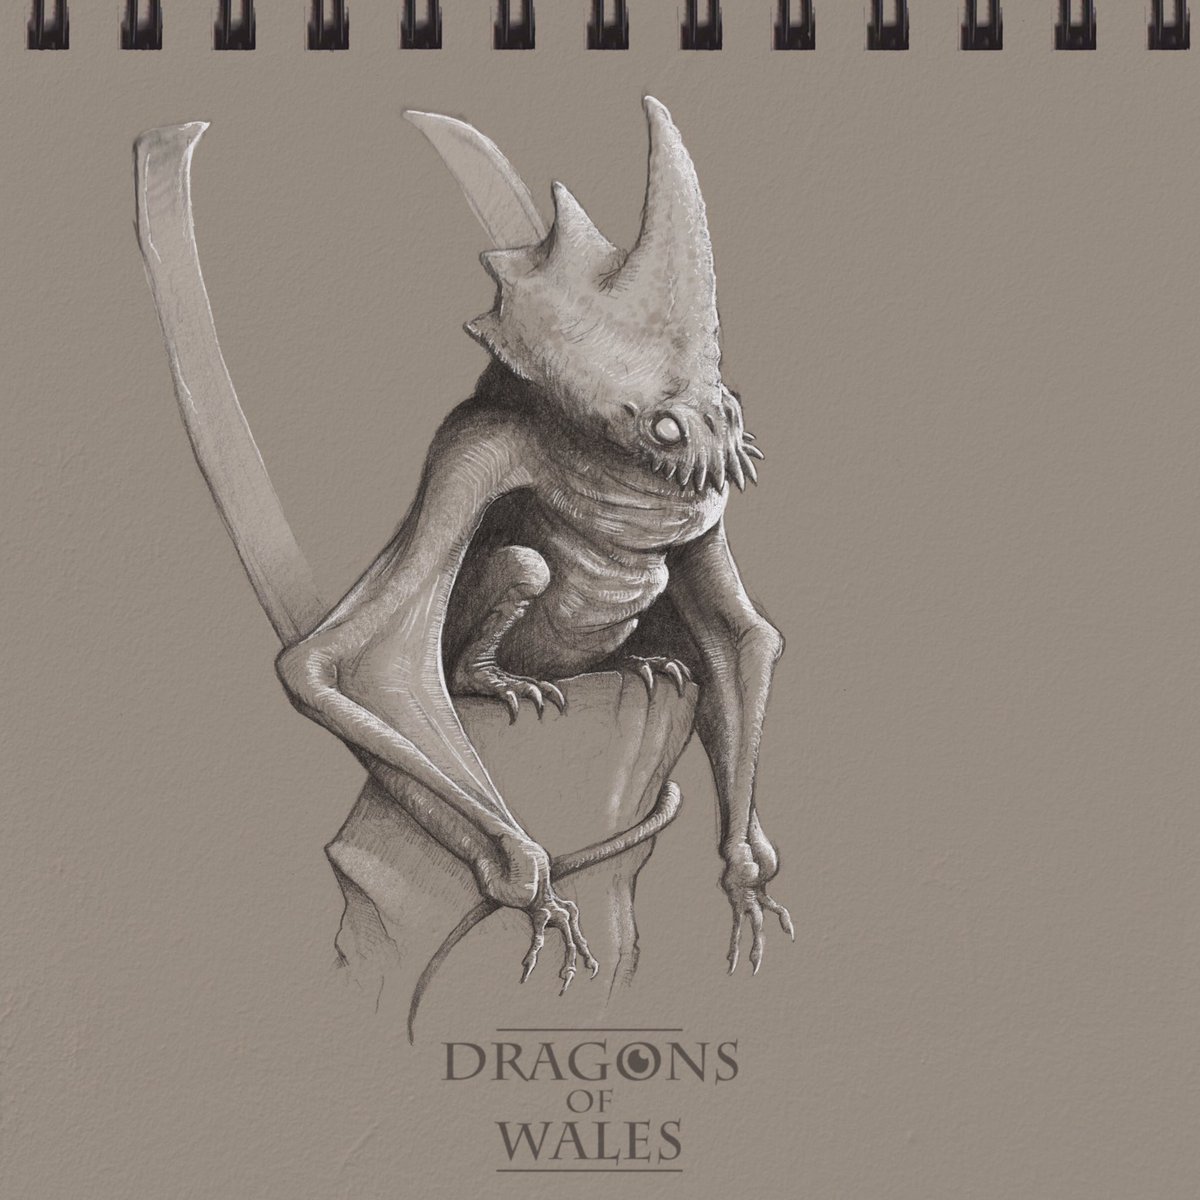 THREAD: 100 Days, 100 Dragons. Well, this it. The 100th and last of my  #DailyDragon sketches, all done during  #lockdown in Wales . This seems like a good time to bring them all together in one (long) thread. So here goes (1/25)